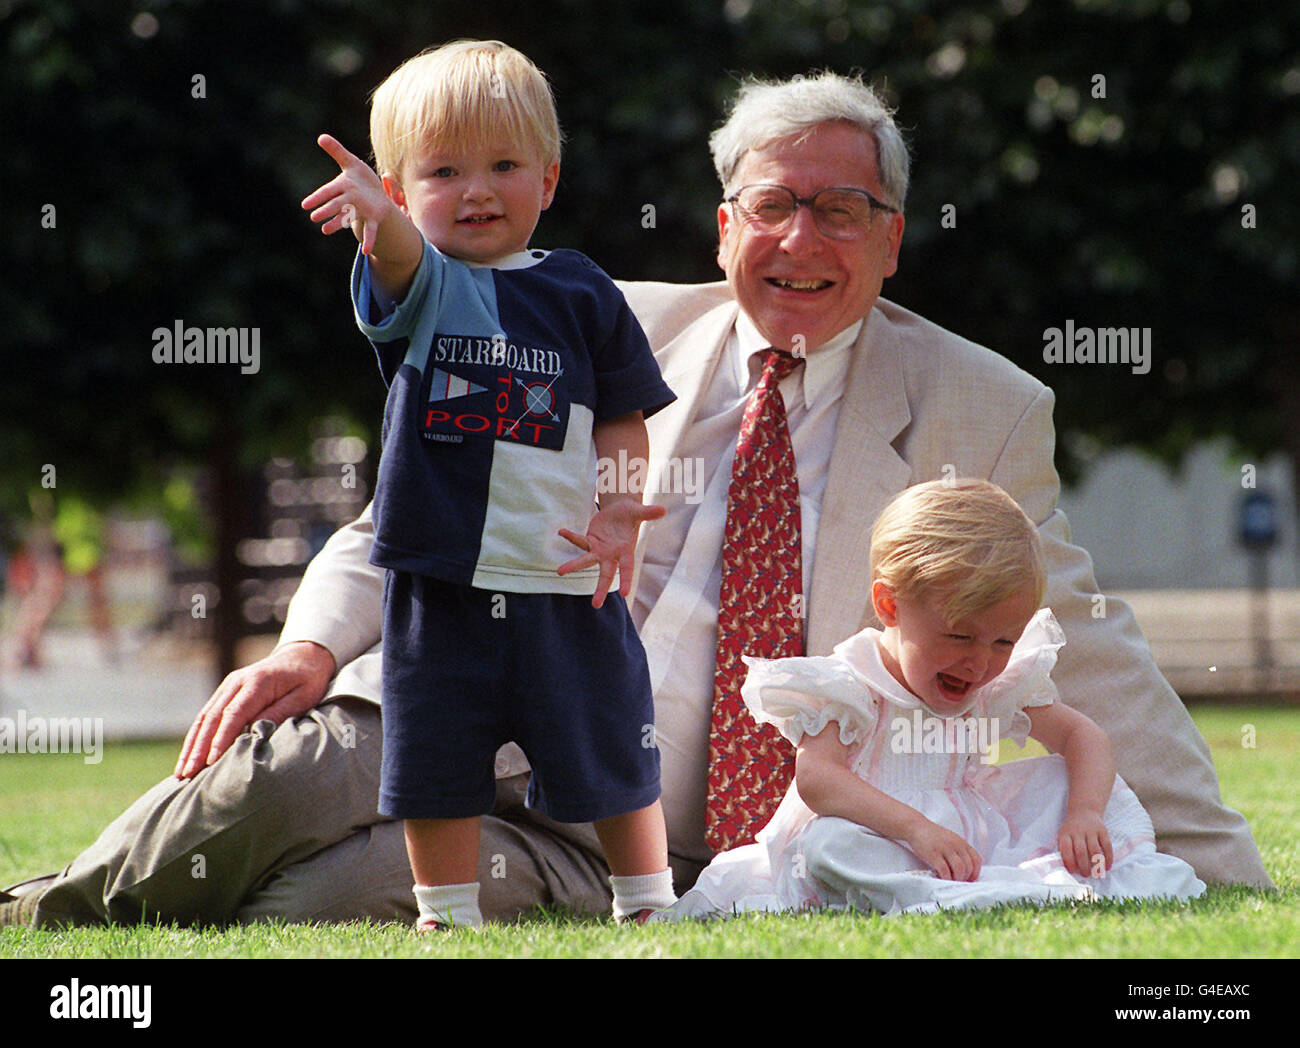 Prof Robert Edwards, one of the pioneering scientists responsuble for IVF (Test Tube) babies on the treatments 20th birthday. Prof Edwards is pictured with two-year-old twins Jack and Sophie Emery whose births resulted from IVF treatment on the lawn of New Palace Yard Westminster today (Monday). Photo by Stefan Rousseau/PA. Stock Photo